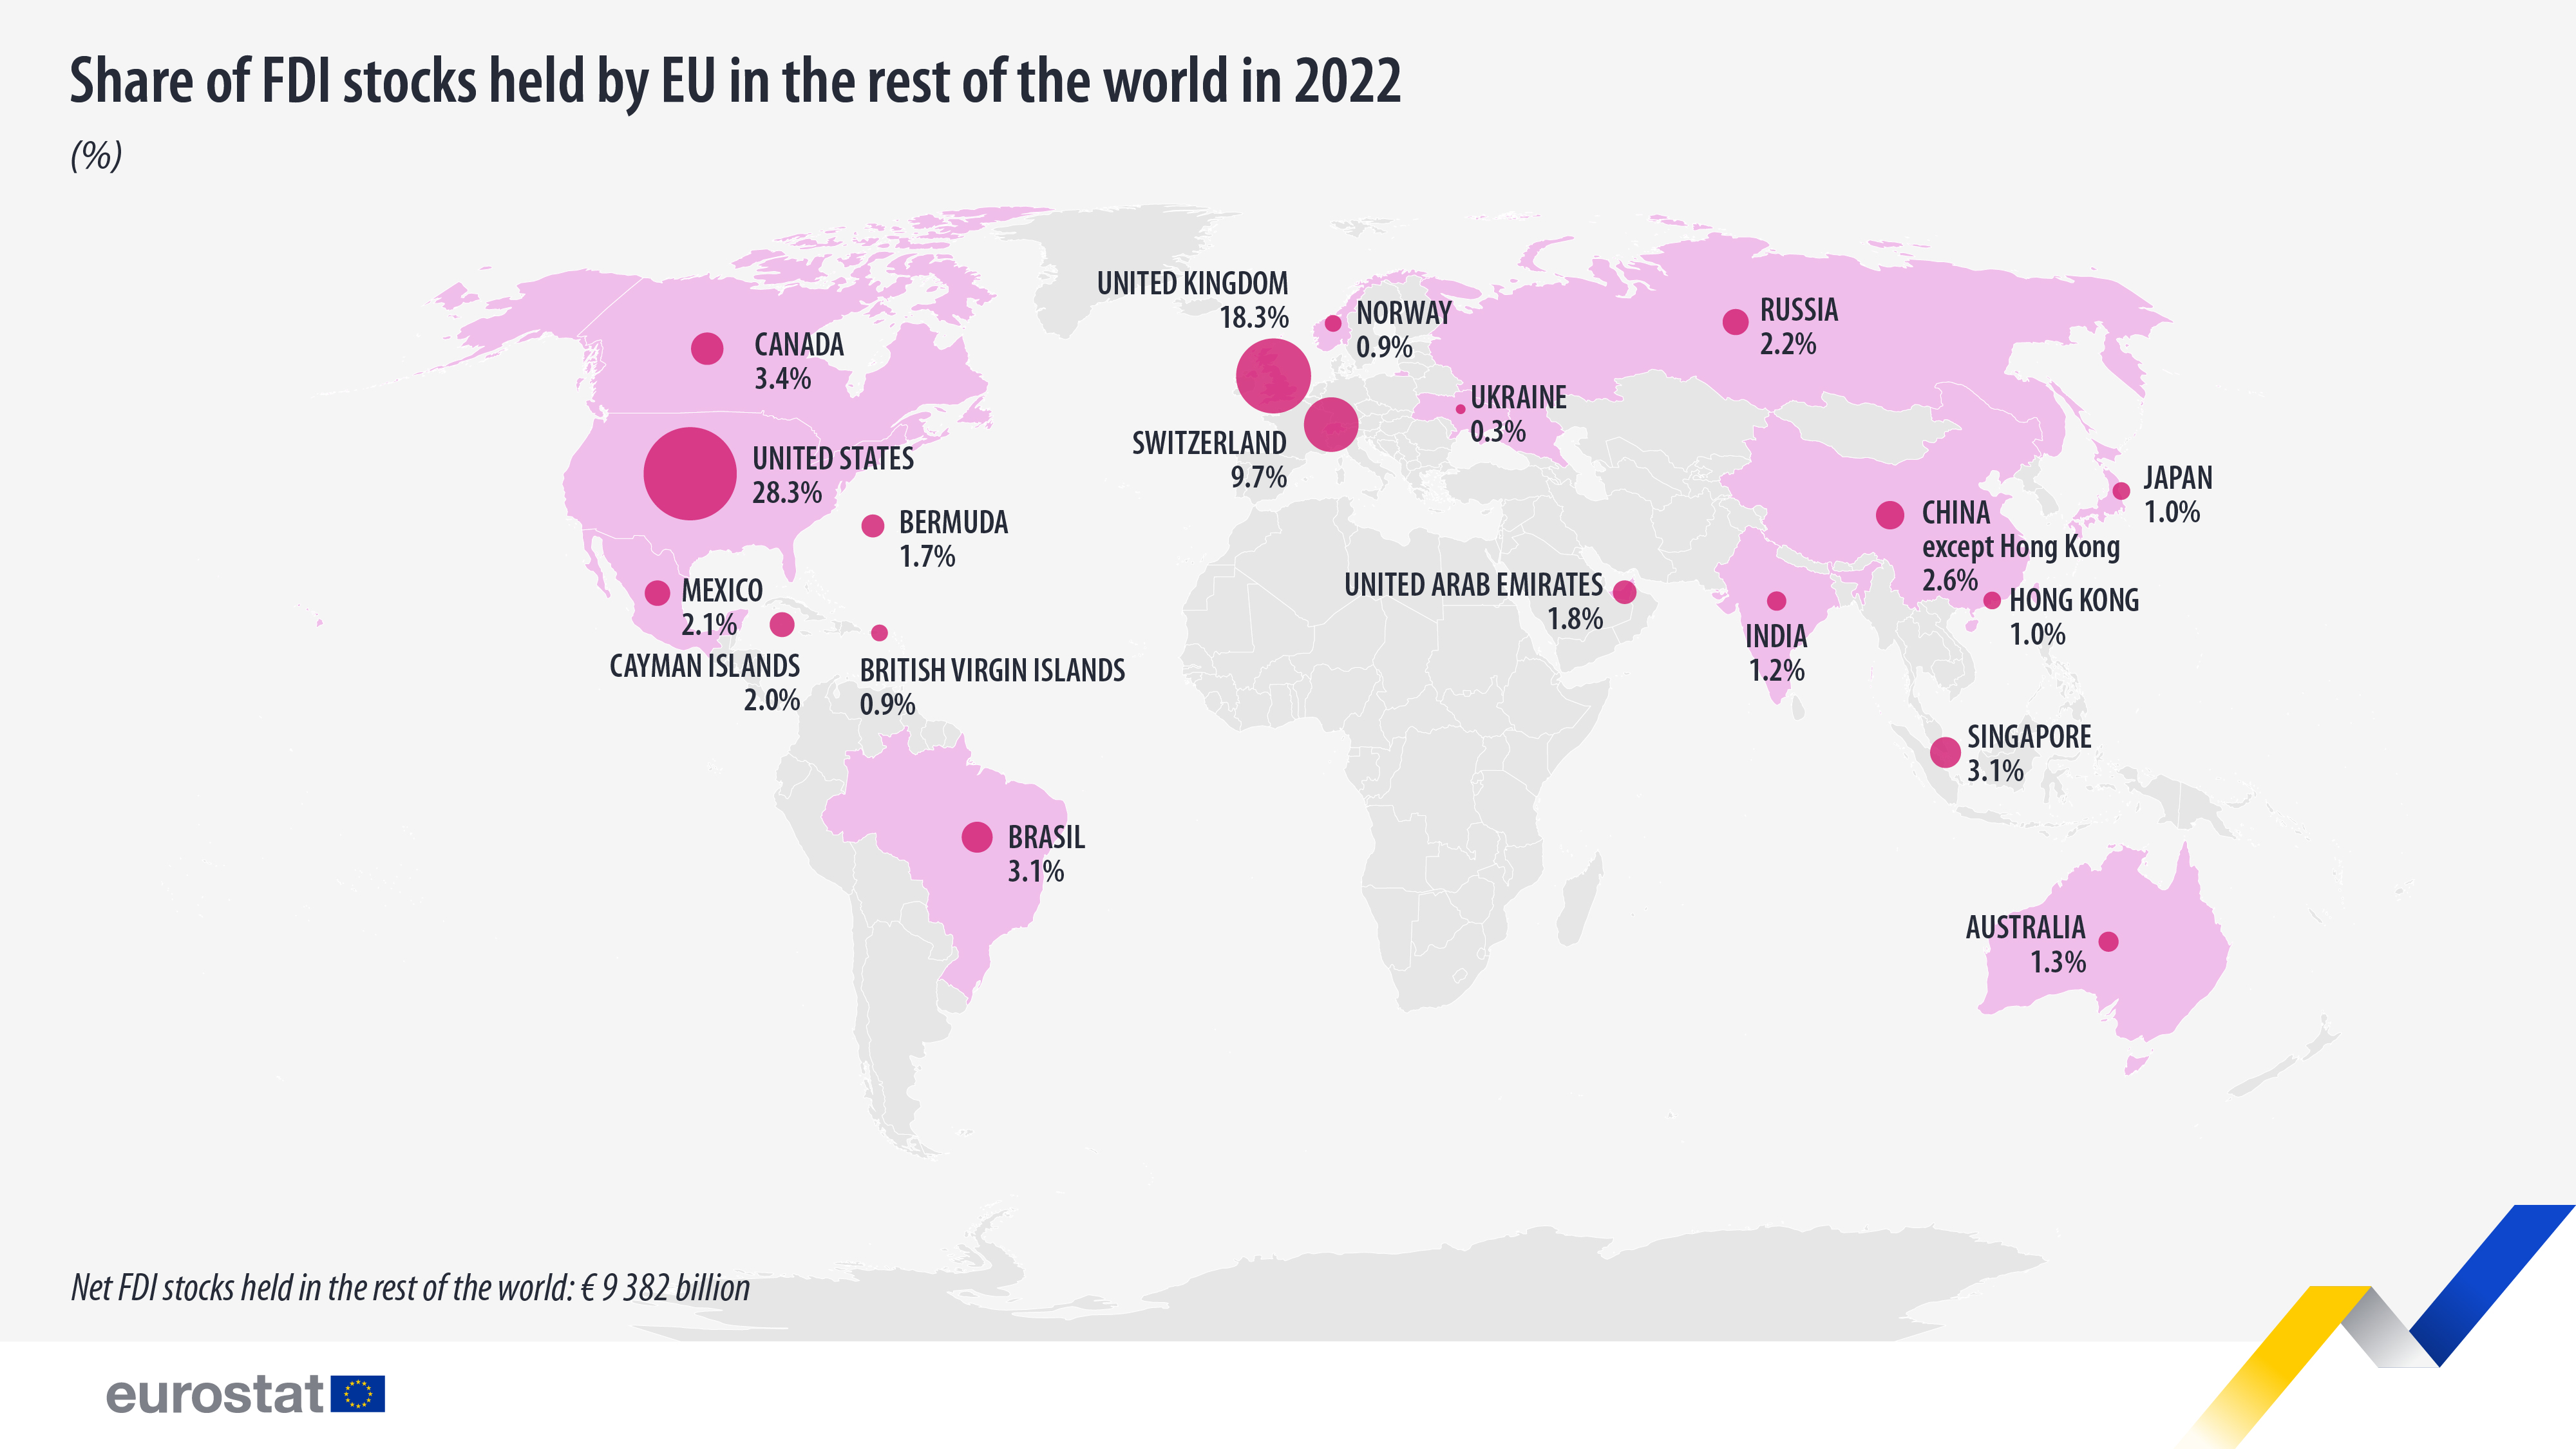 Share of FDI stocks held by EU in the rest of the world in 2022, %